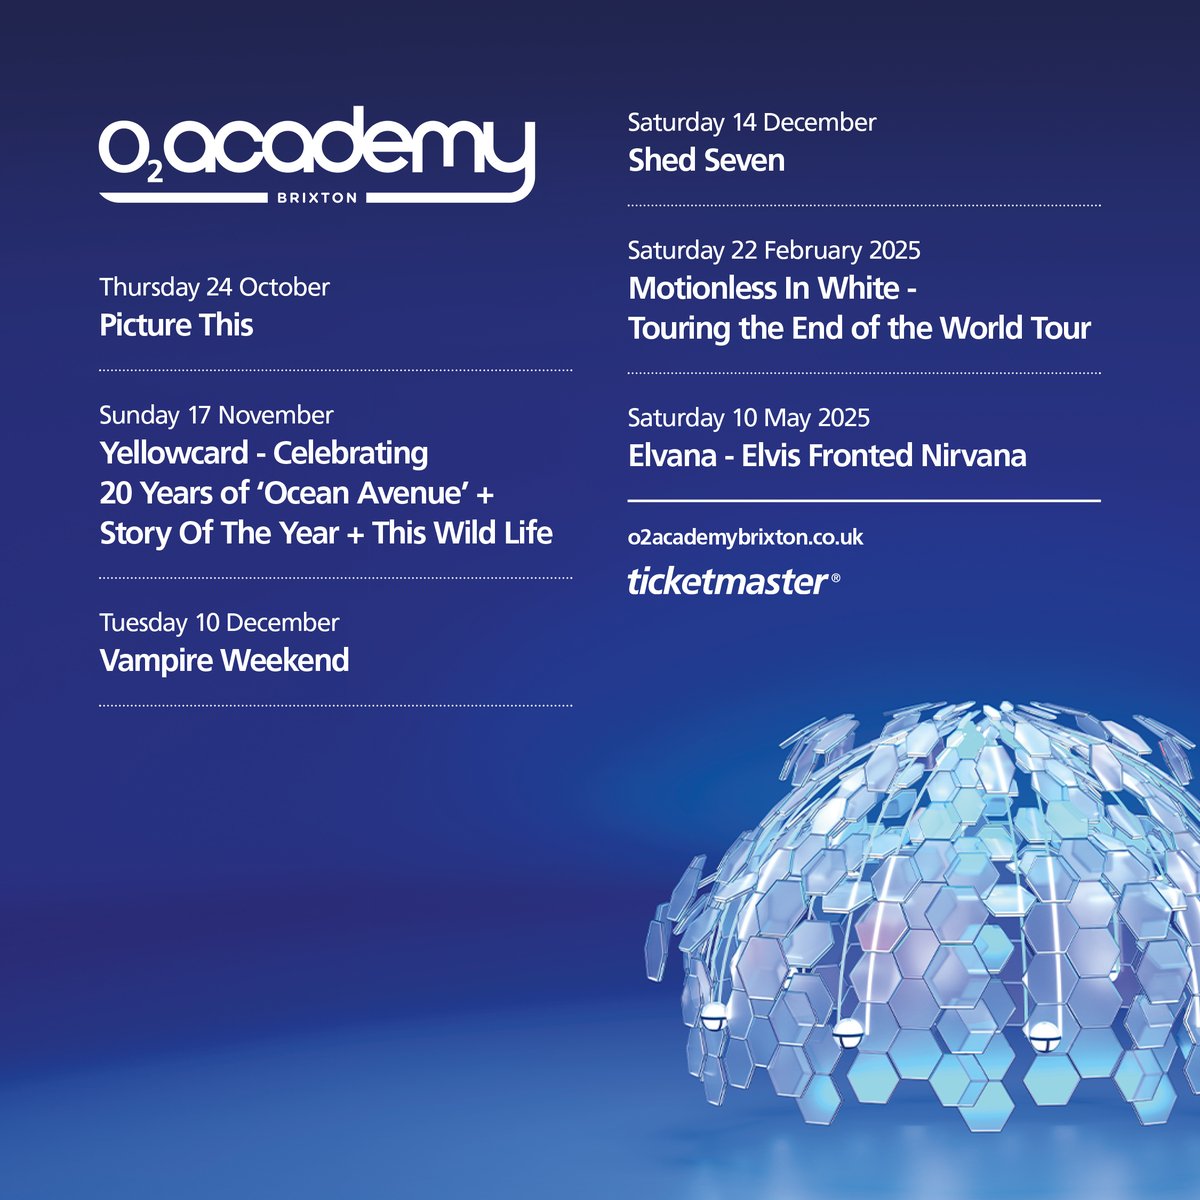 Gigs coming up this month at @O2AcademyBrix, plus even more new shows added this week including Arcade Fire (Thu 04 Jul), Kamasi Washington (Wed 16 Oct), Yellowcard (Sun 17 Nov), Vampire Weekend (Tue 10 Dec), Motionless In White (Sat 22 Feb) and more #O2AcademyBrixton